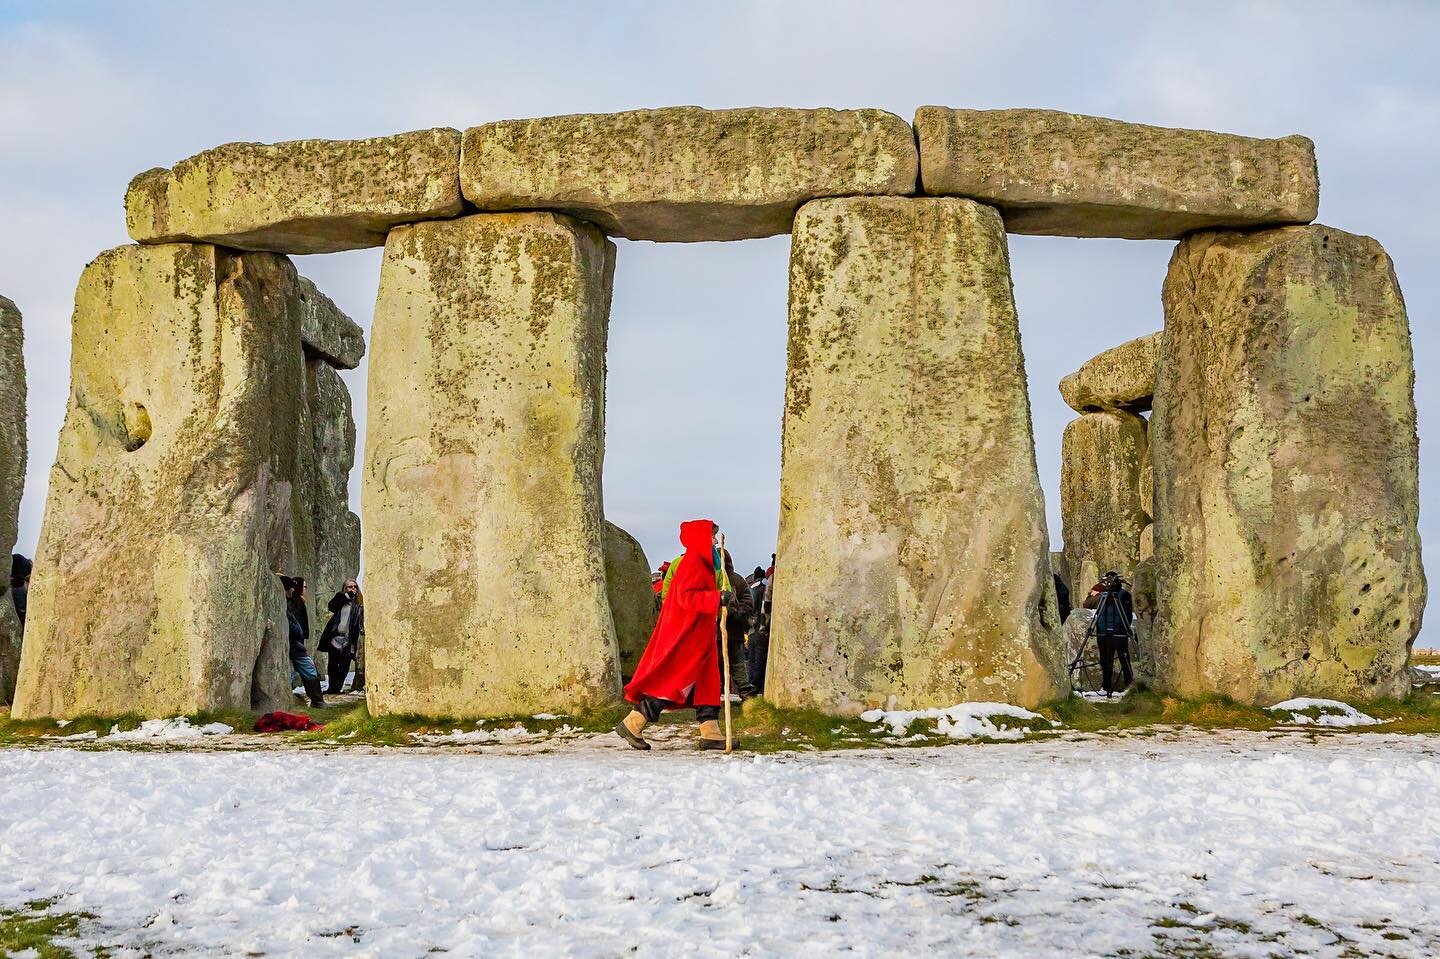 Happy Spring Equinox! Here are a couple of images from a few years back. It was my first time visiting Stonehenge and what a perfect time to experience it 😍  #travelphotography #photography #springequinox